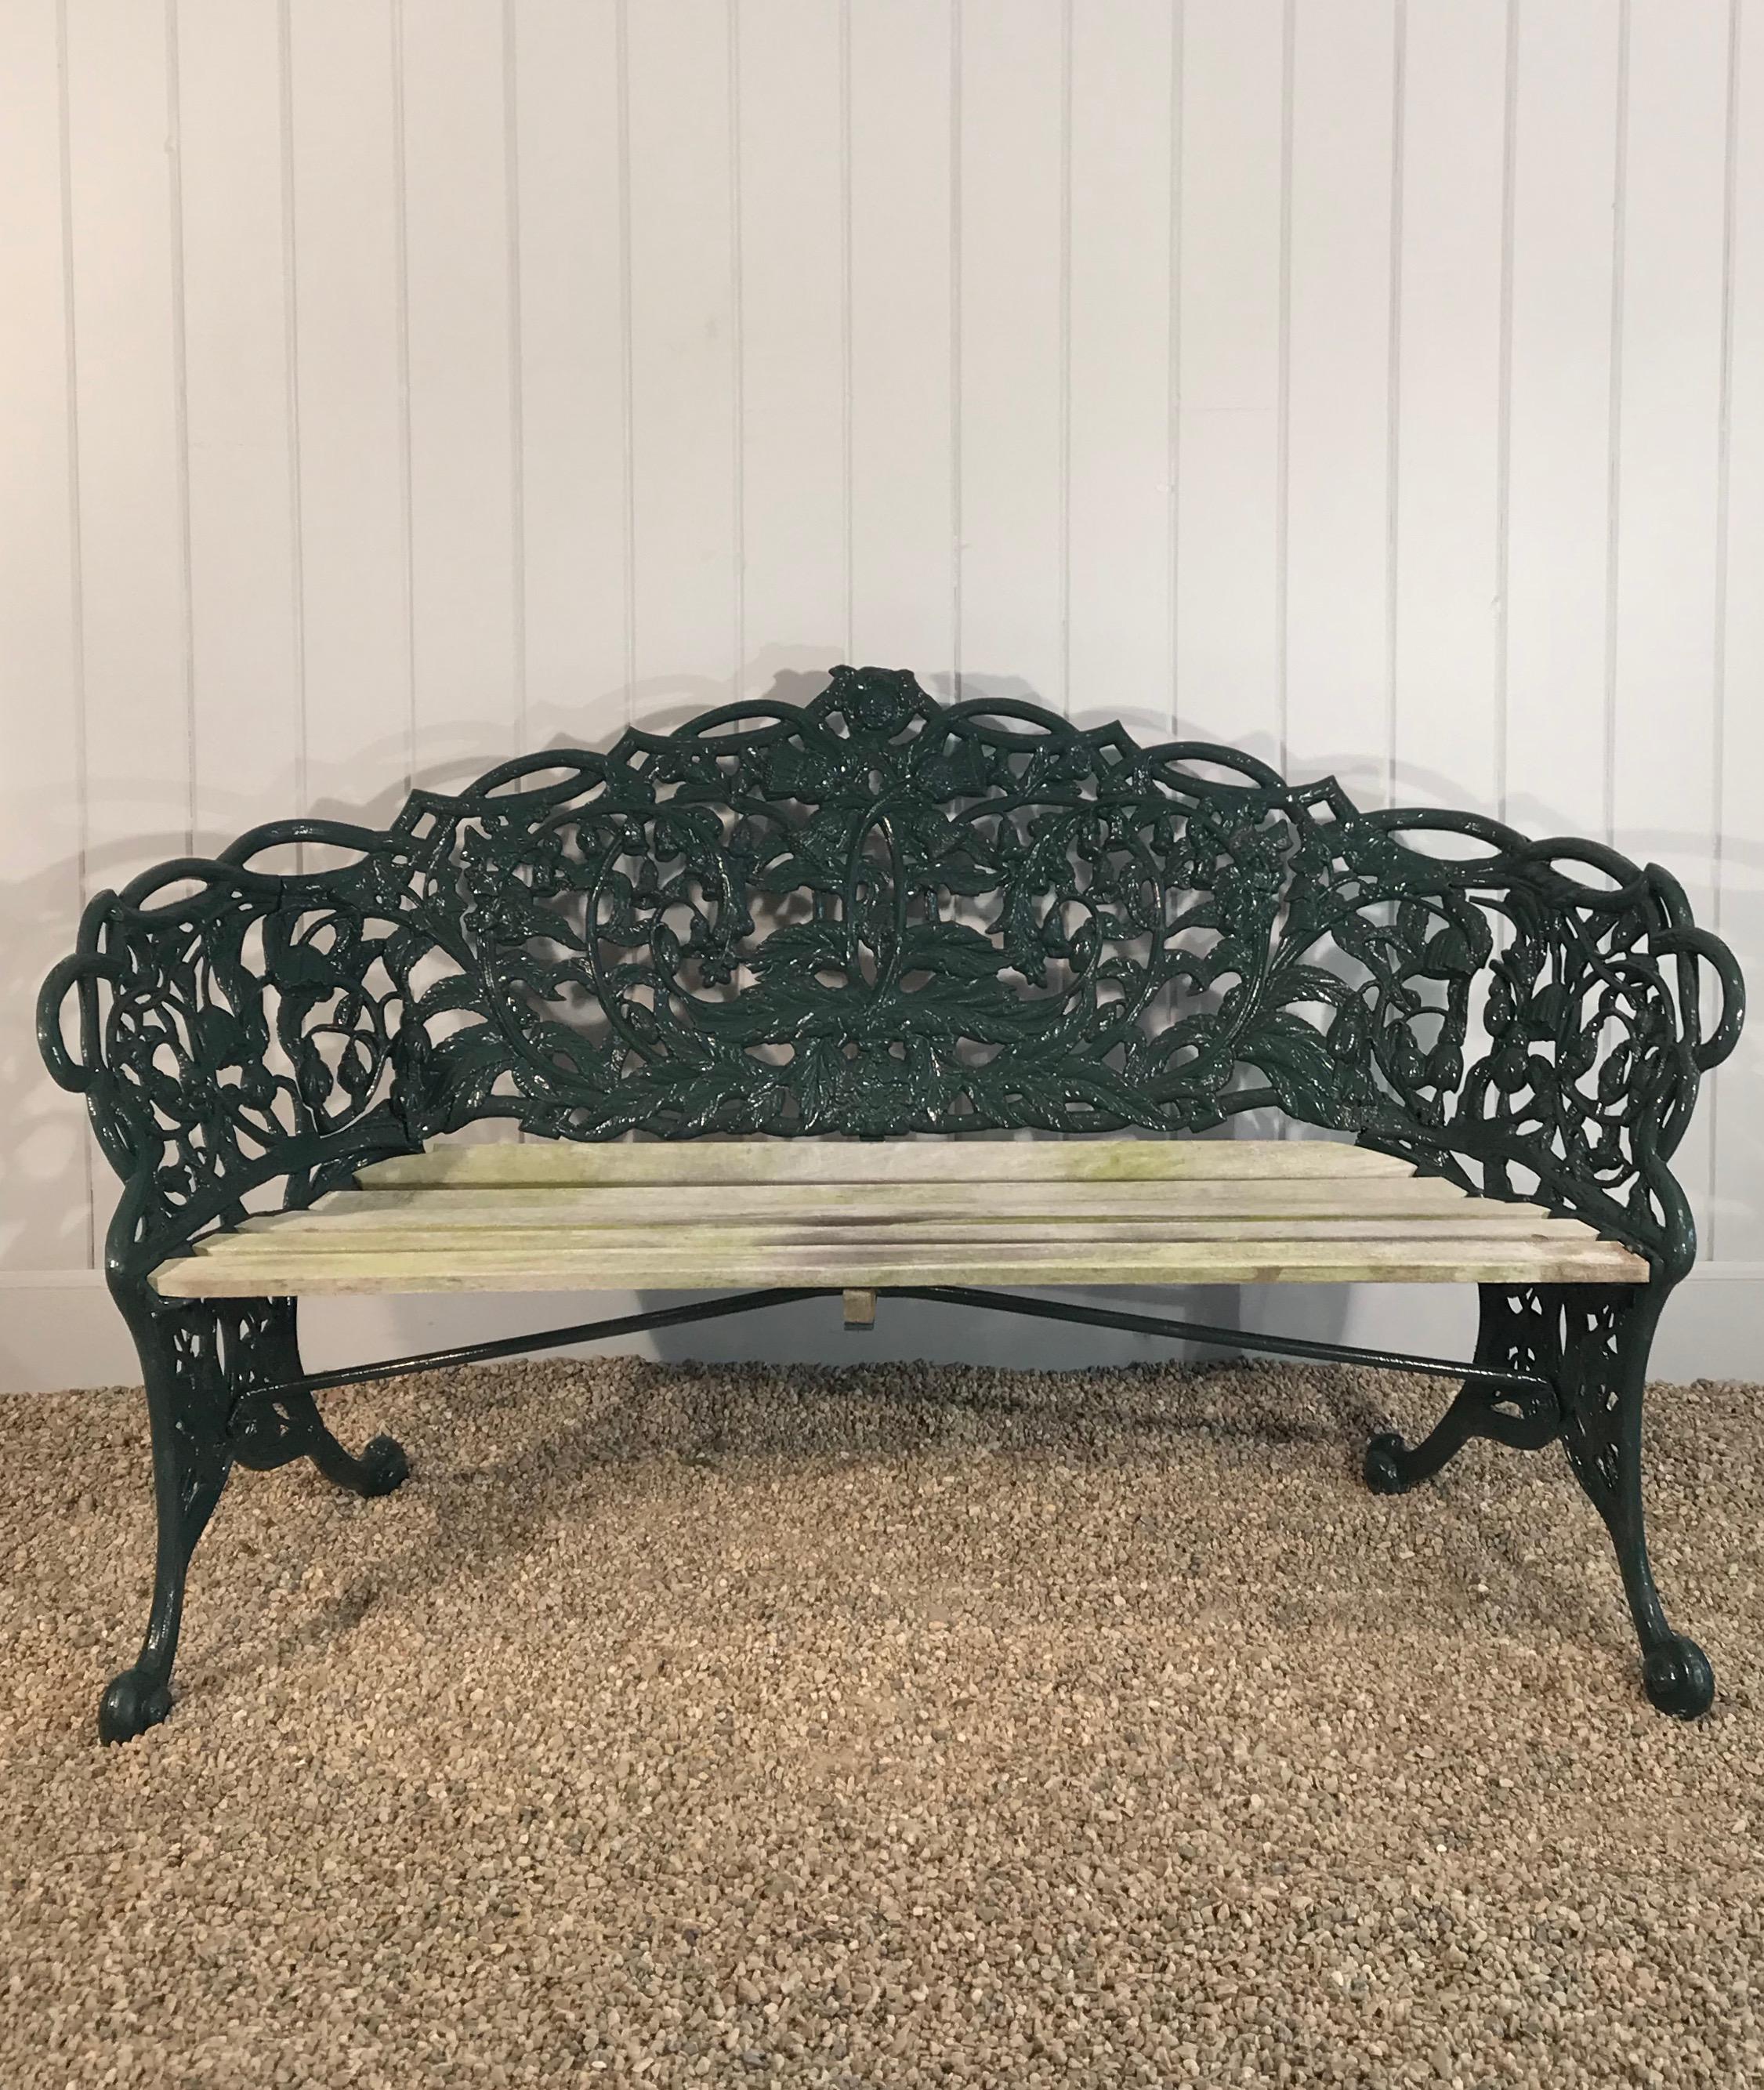 This rare cast iron bench was made in 1858 by the famed Glaswegian Maker, Thomas Perry and Sons and is in perfect condition. It has recently been sandblasted and powder-coated in a dark green and the seat has been replaced with natural oak slats.